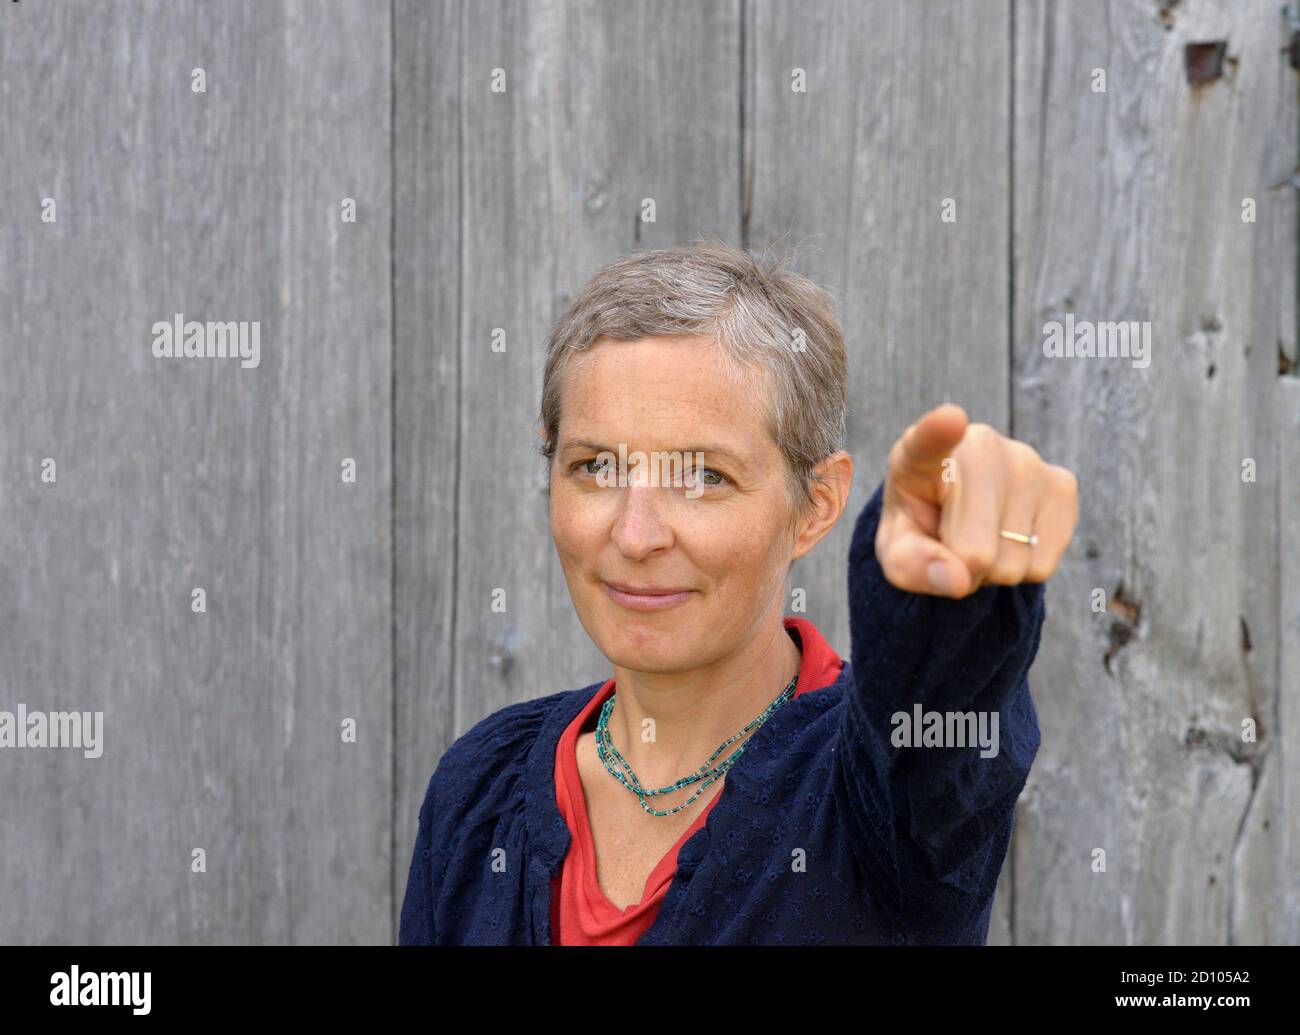 Determined middle-aged Caucasian country woman with short hair points at viewer with index finger of left hand, in front of old barn wood background. Stock Photo